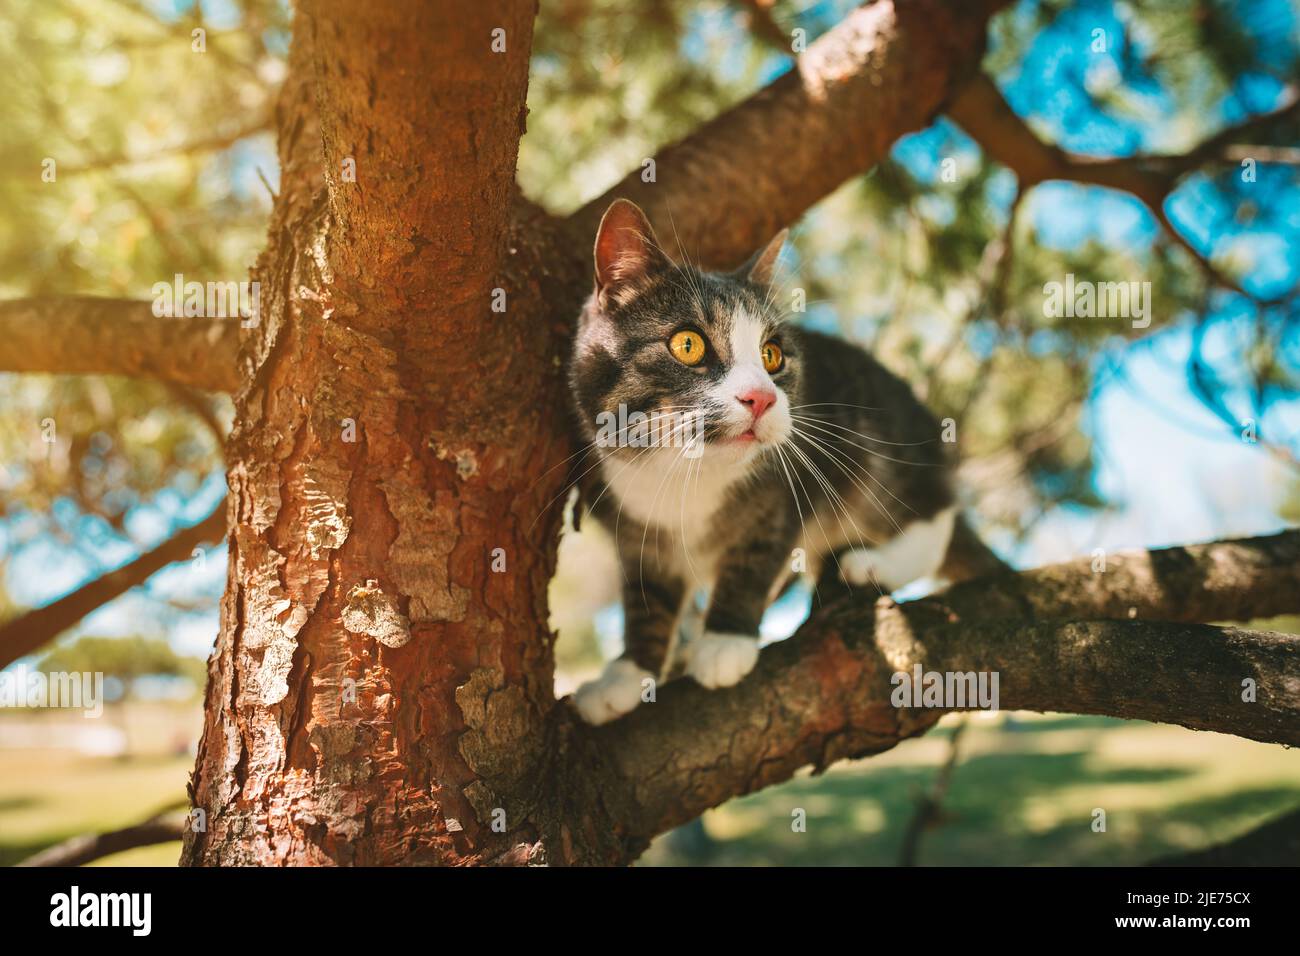 Cute cat sitting on a tree outdoors in nature on a sunny day Stock Photo